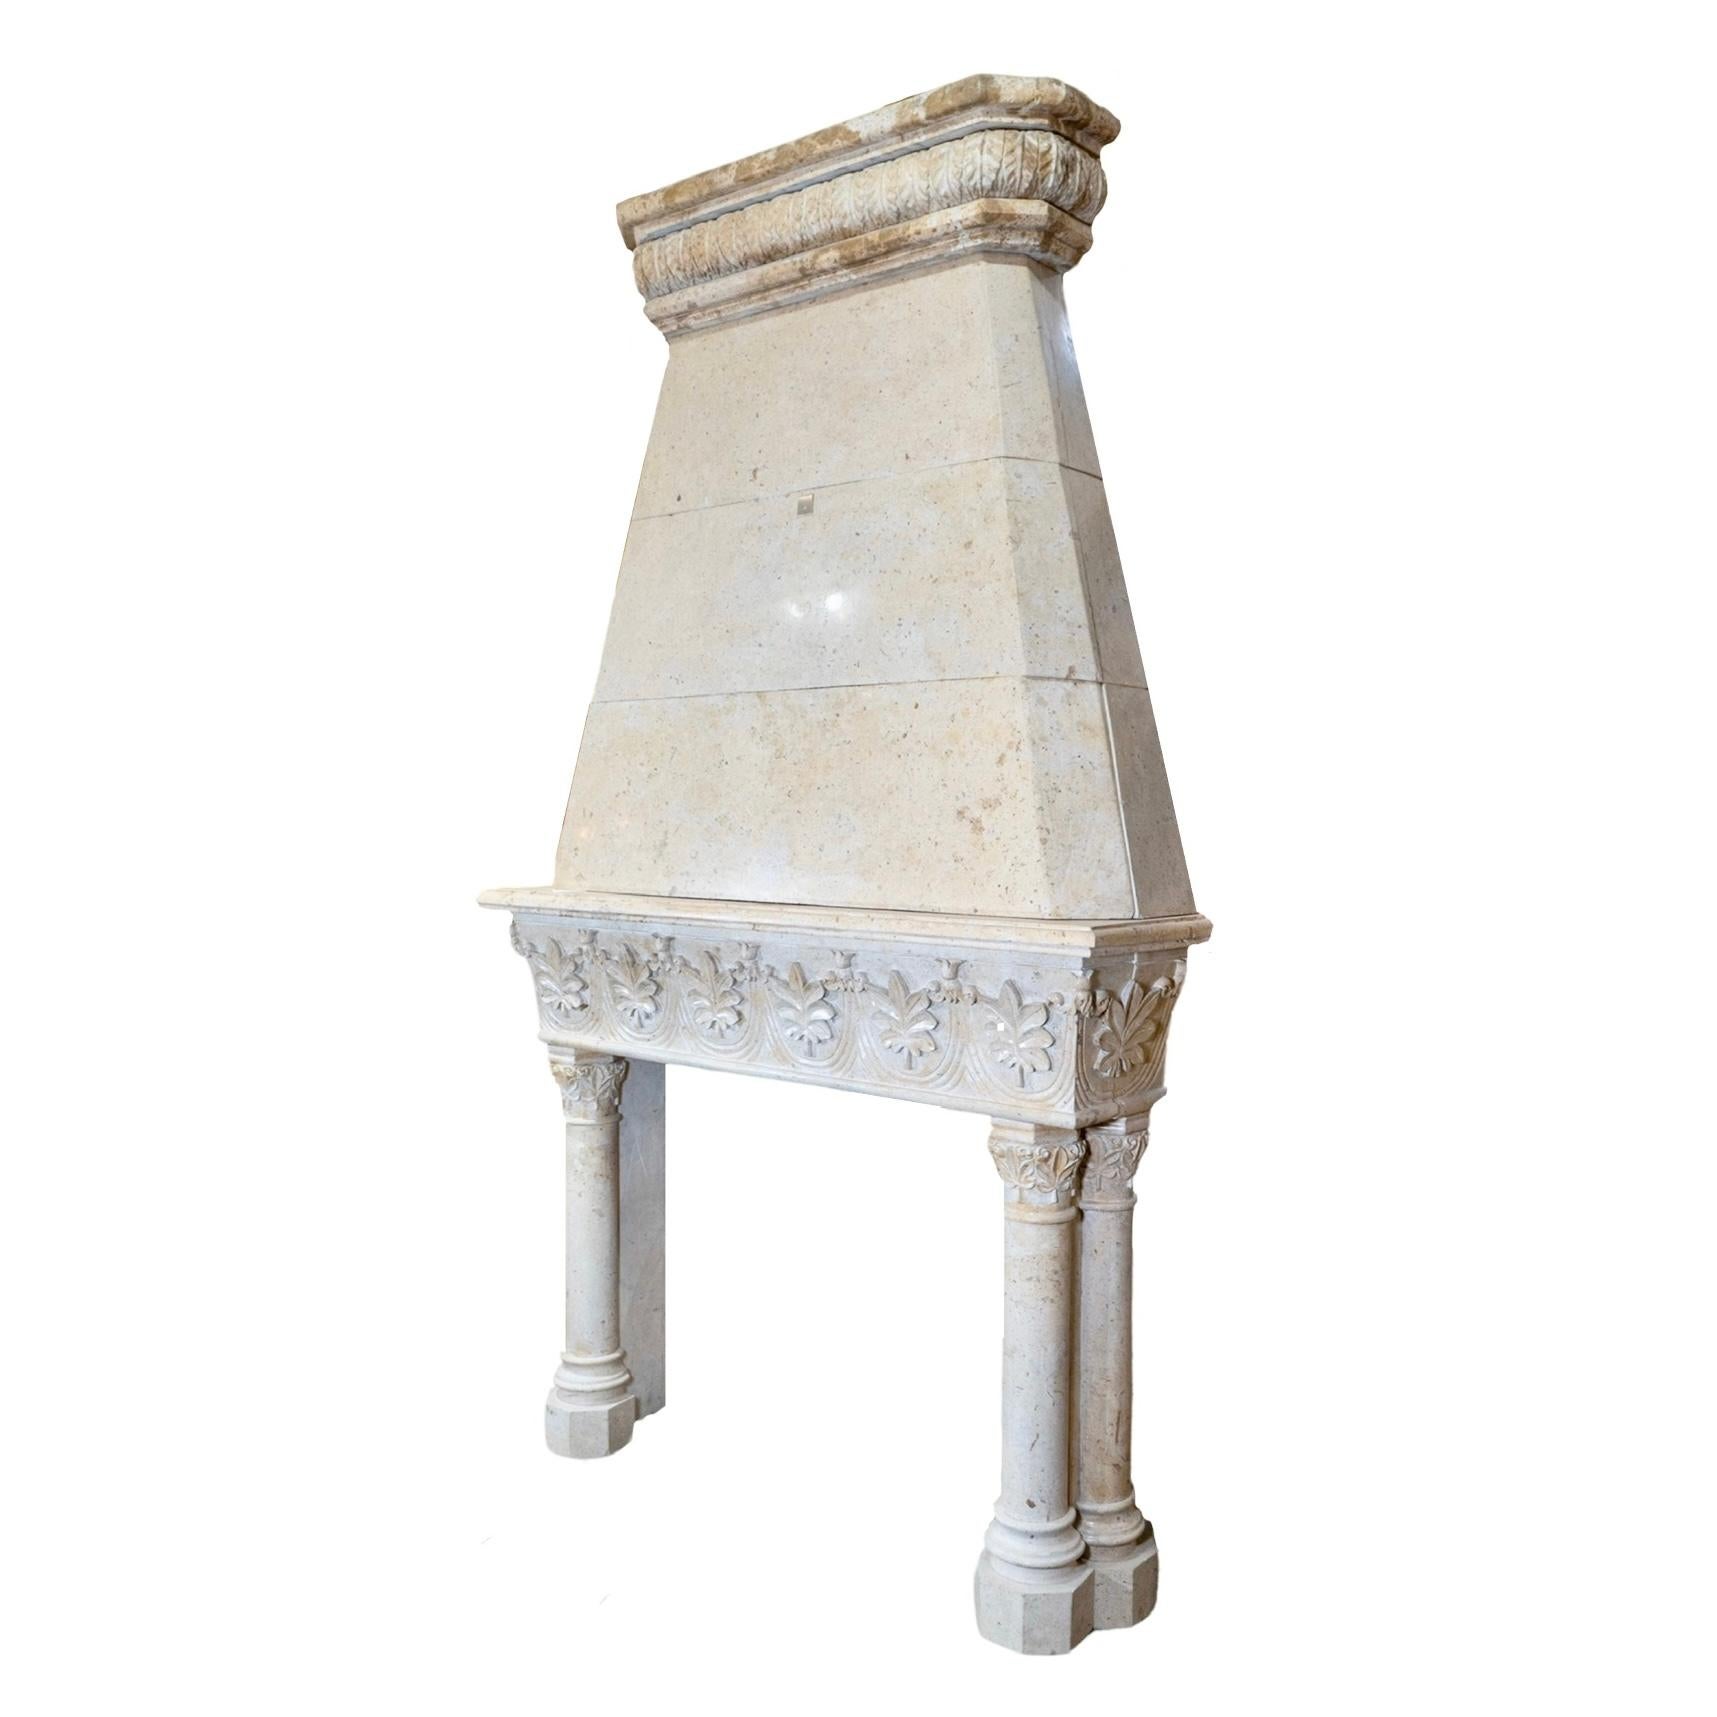 19th Century Italian Polished Travertine Fireplace For Sale